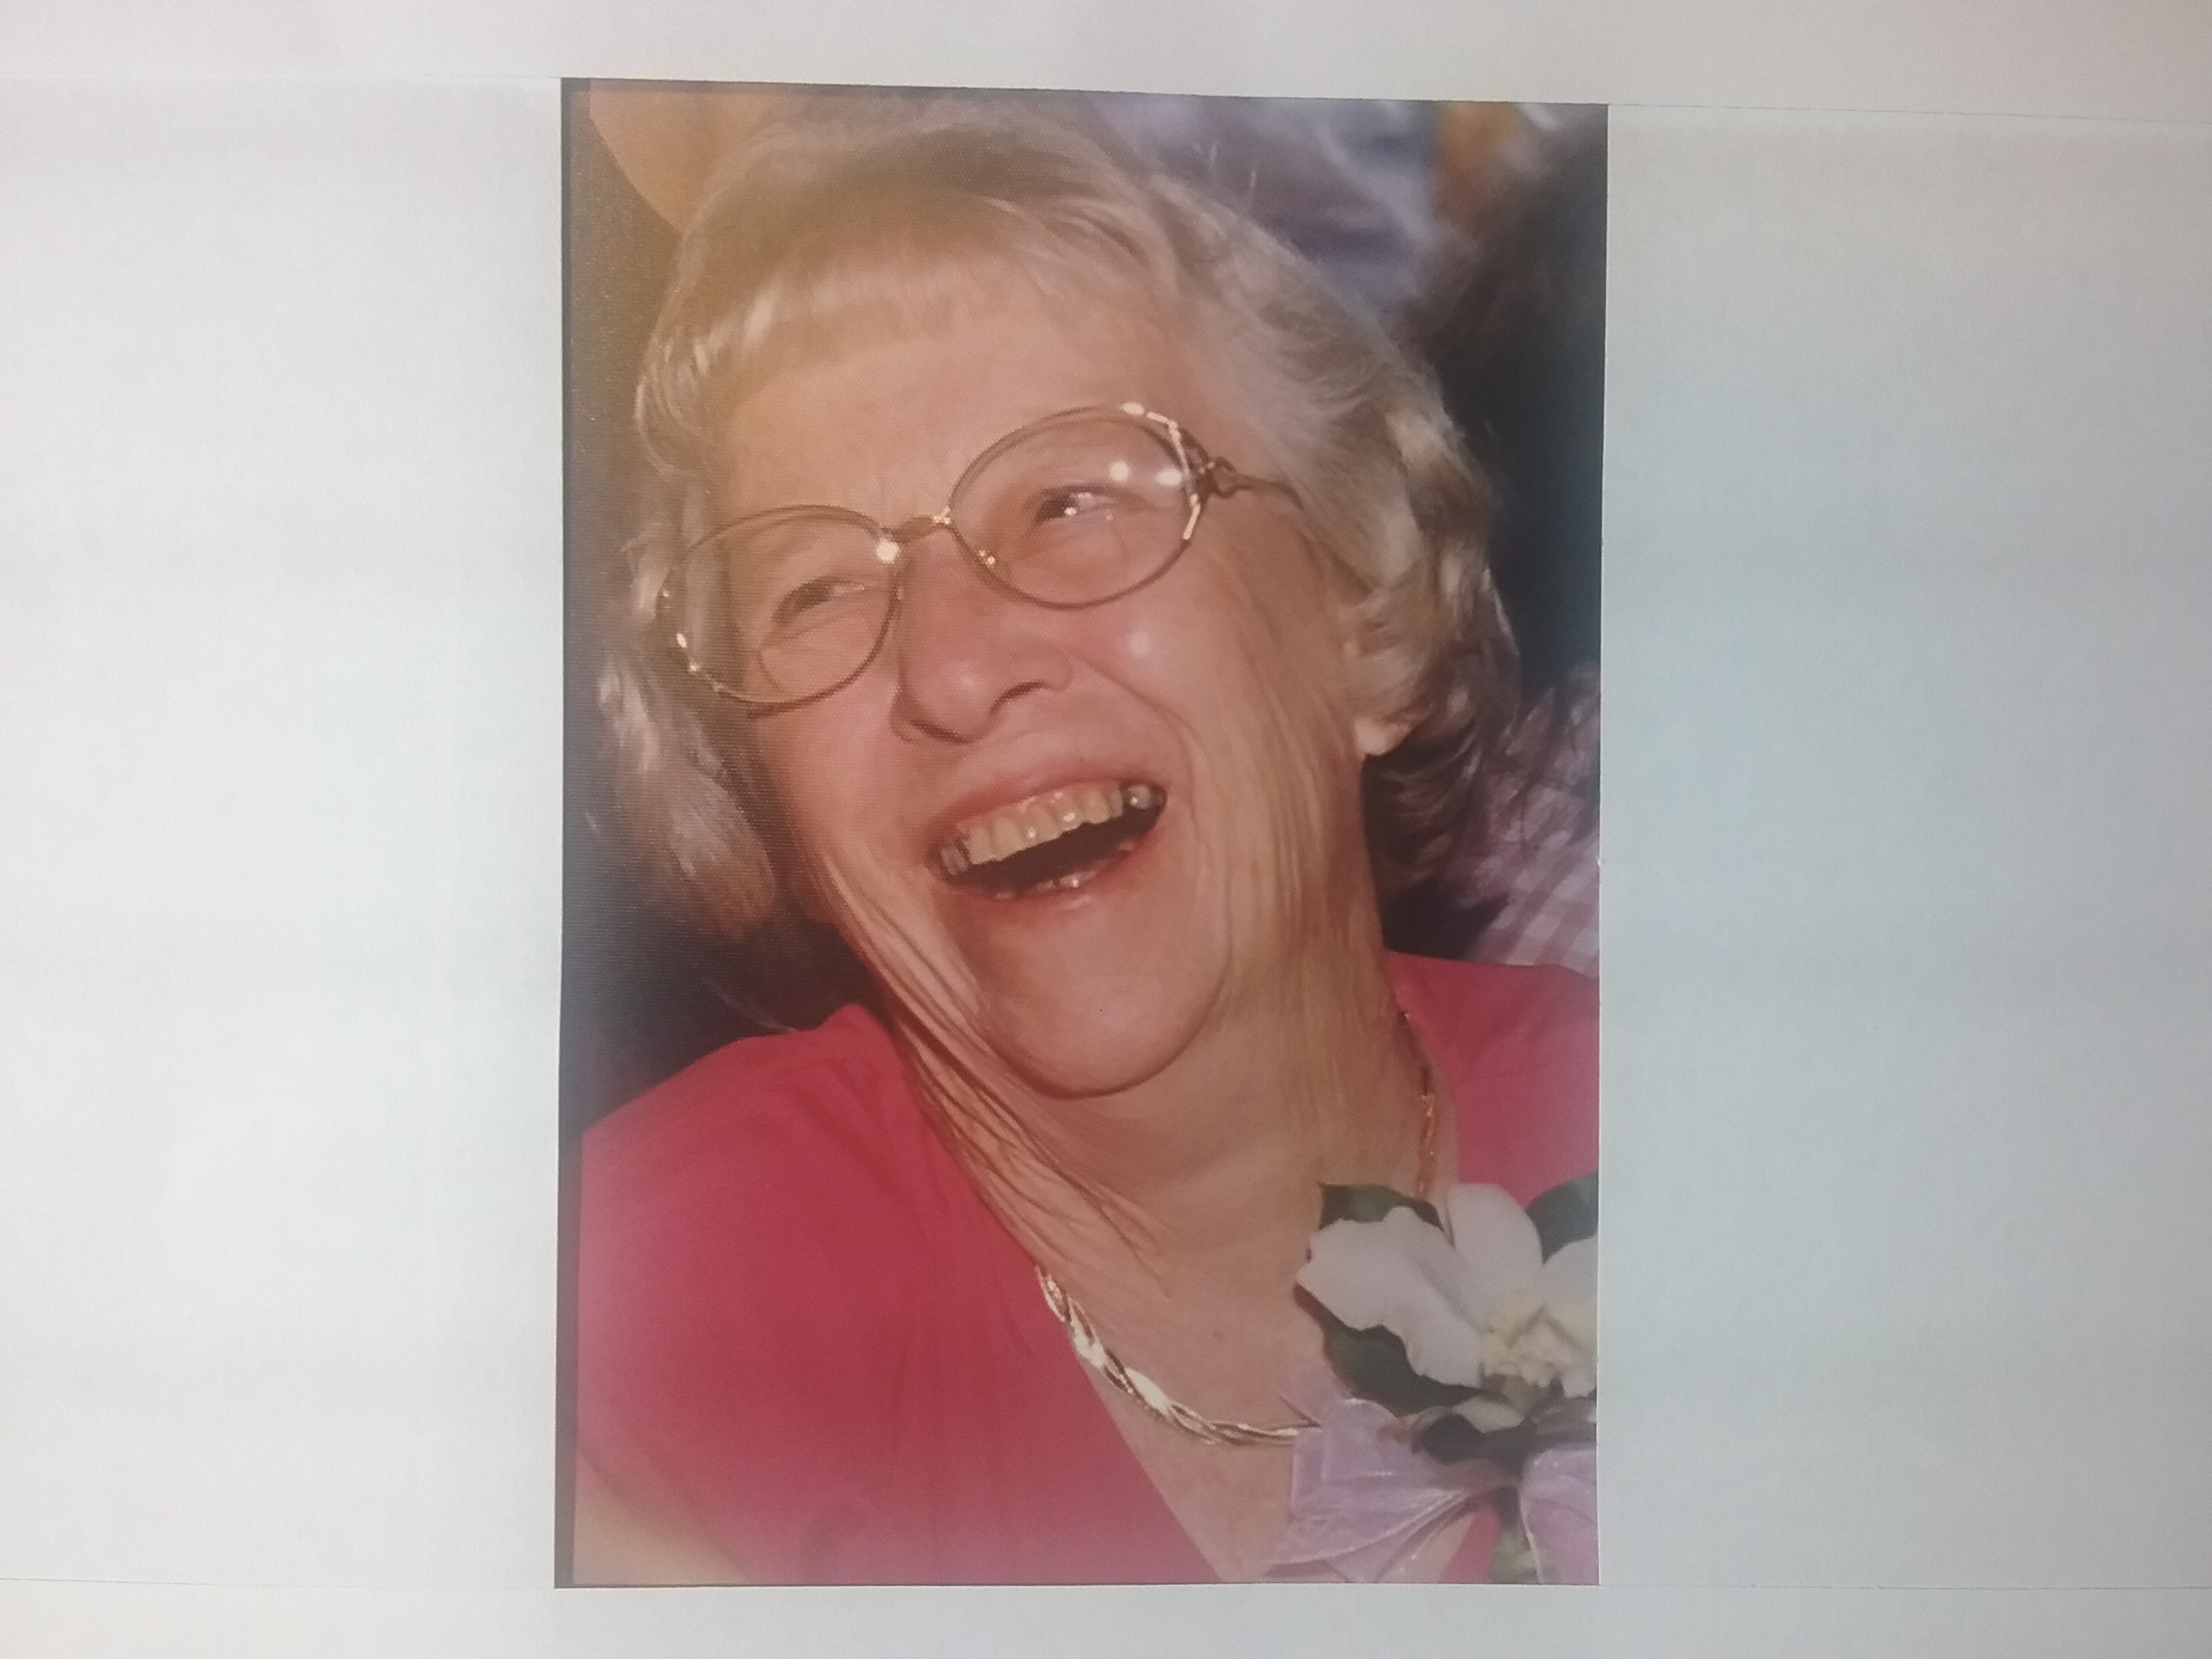 Granny Roberts, photographed at the author's wedding in 1997.(Courtesy of Ann-Marie Hines)